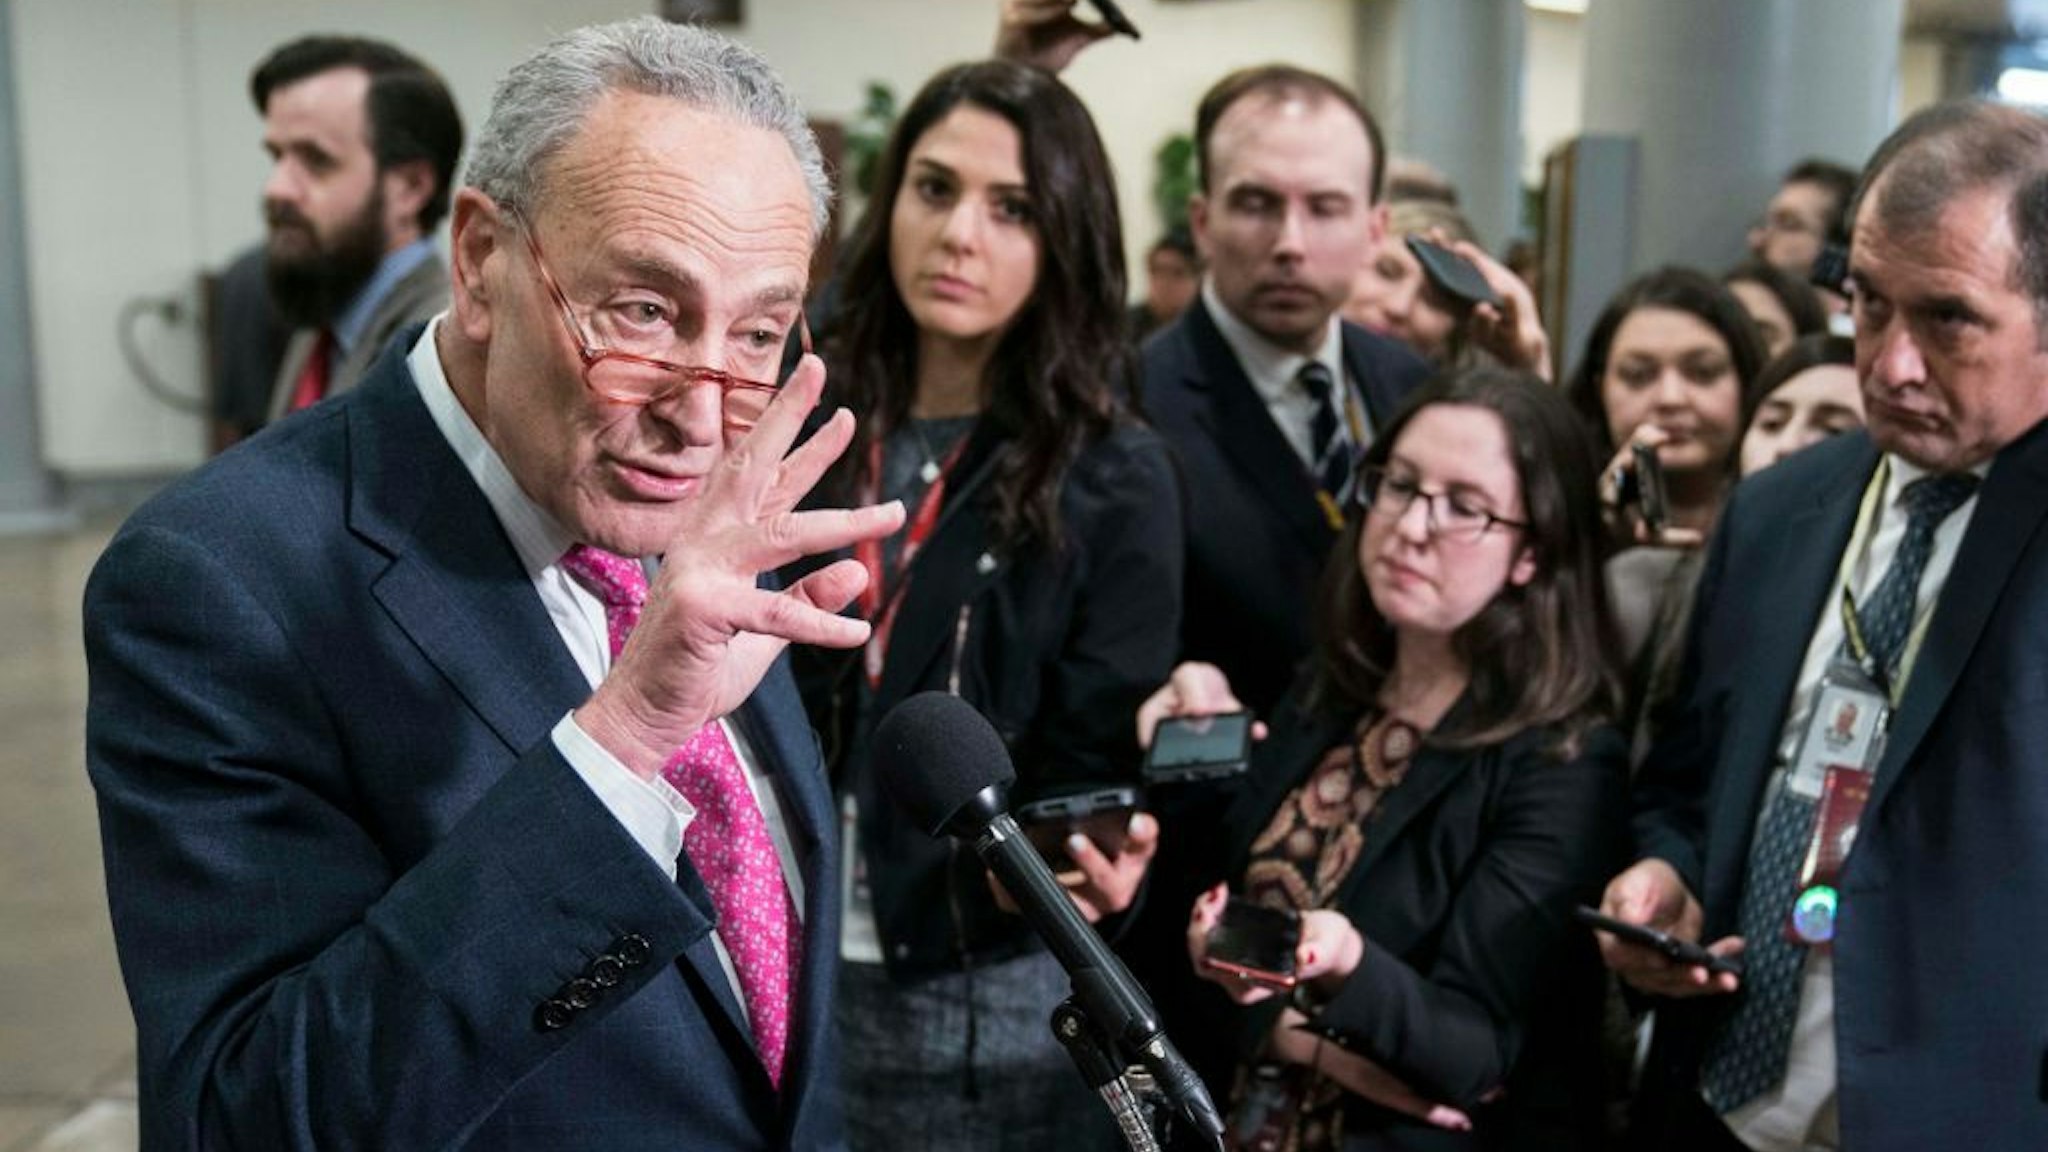 U.S. Minority Leader Chuck Schumer (D-NY) speaks to reporters near the Senate subway during a dinner break on the first day that senators have the opportunity to ask questions during impeachment proceedings against U.S. President Donald Trump on January 29, 2020 at the U.S. Capitol in Washington, DC. (Photo by Sarah Silbiger/Getty Images)